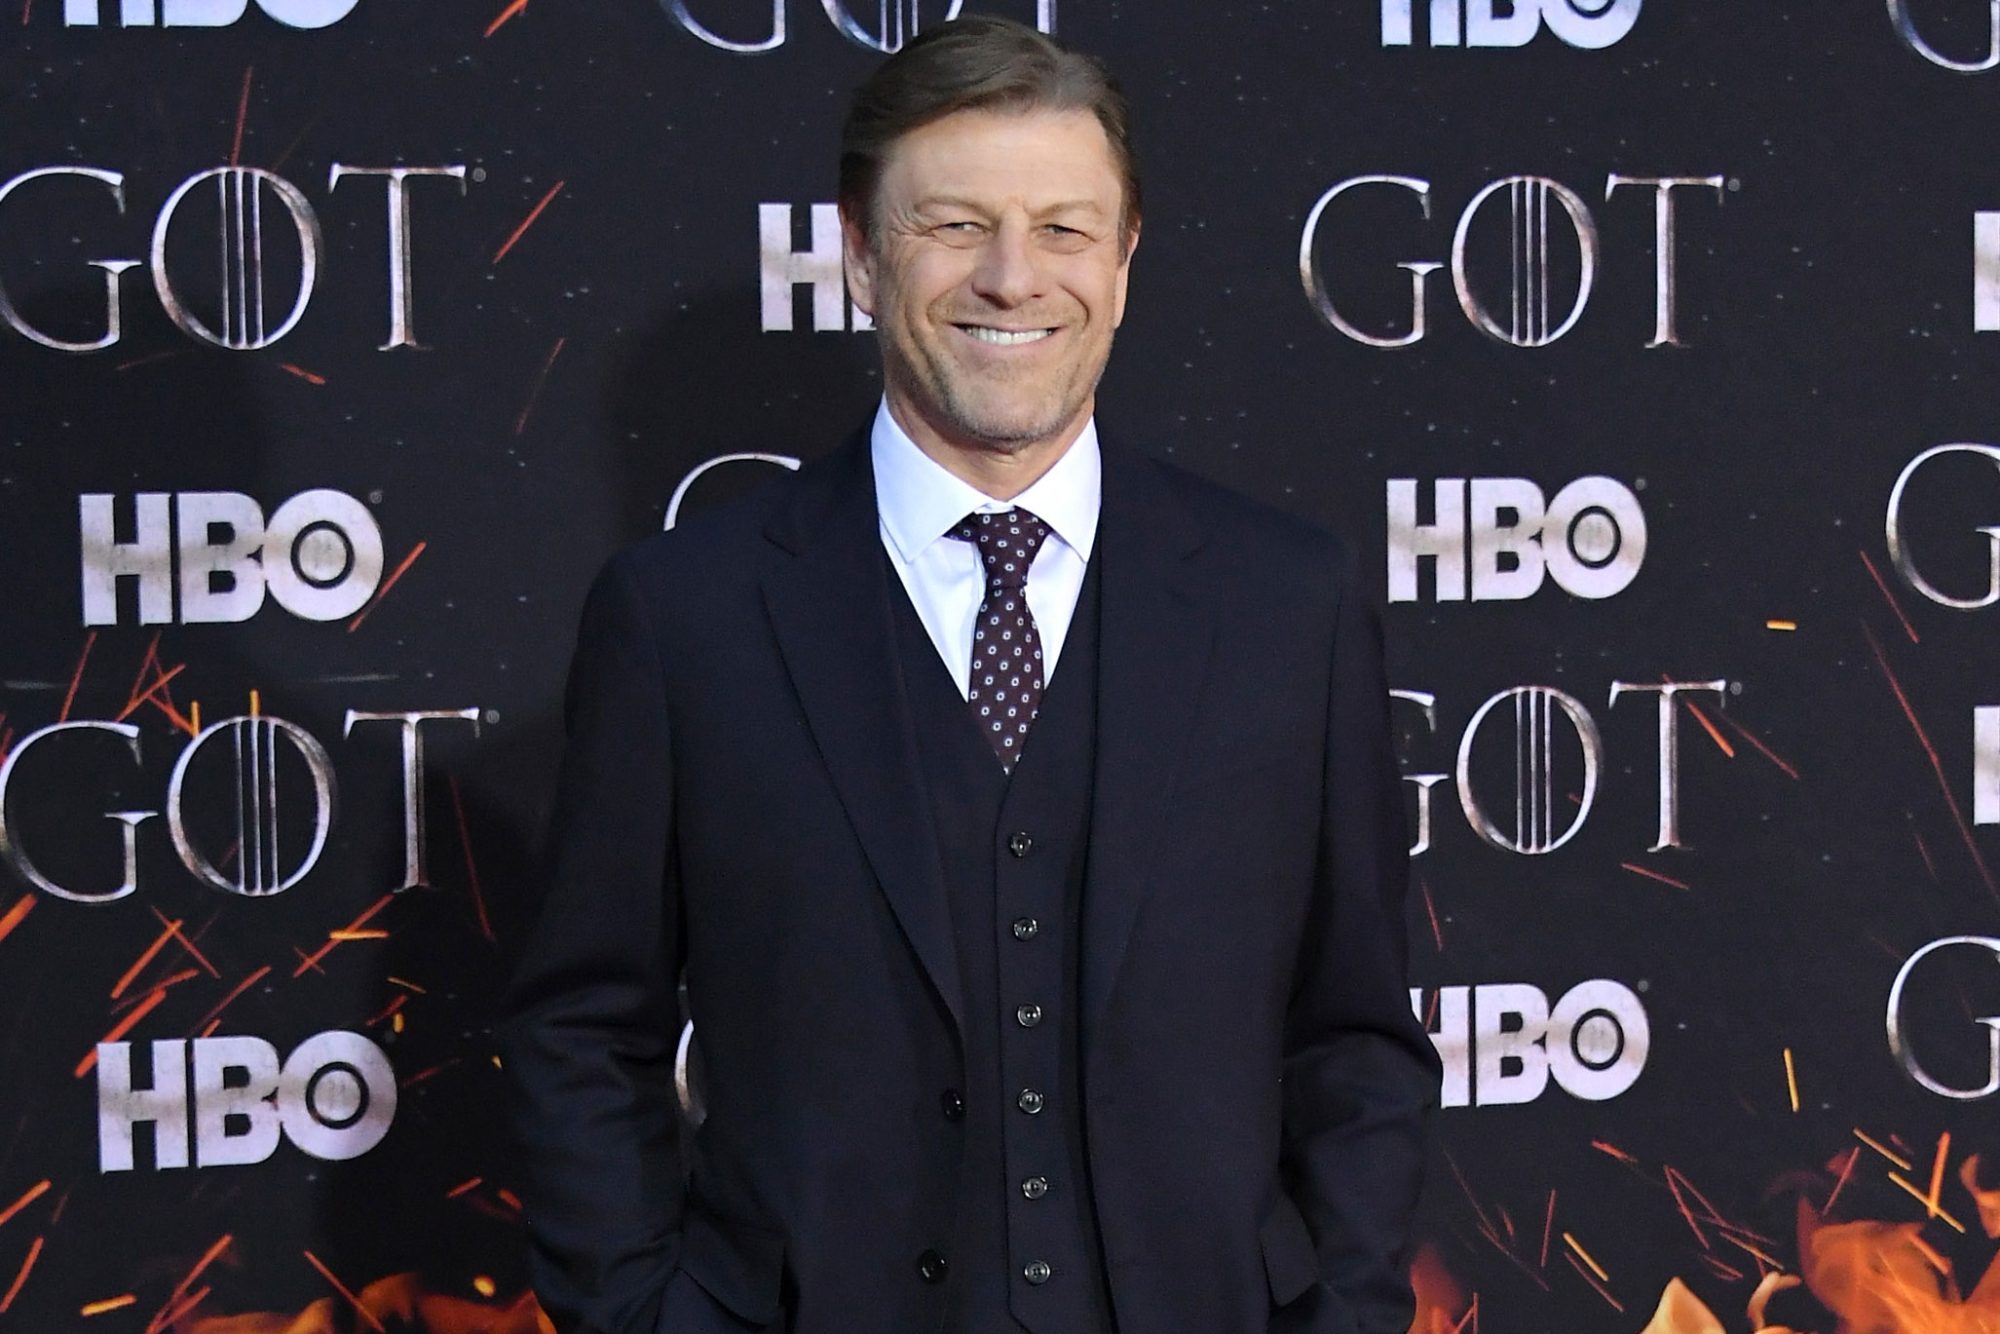 NEW YORK, NY - APRIL 03: Sean Bean attends the "Game Of Thrones" season 8 premiere on April 3, 2019 in New York City. (Photo by Mike Coppola/FilmMagic)